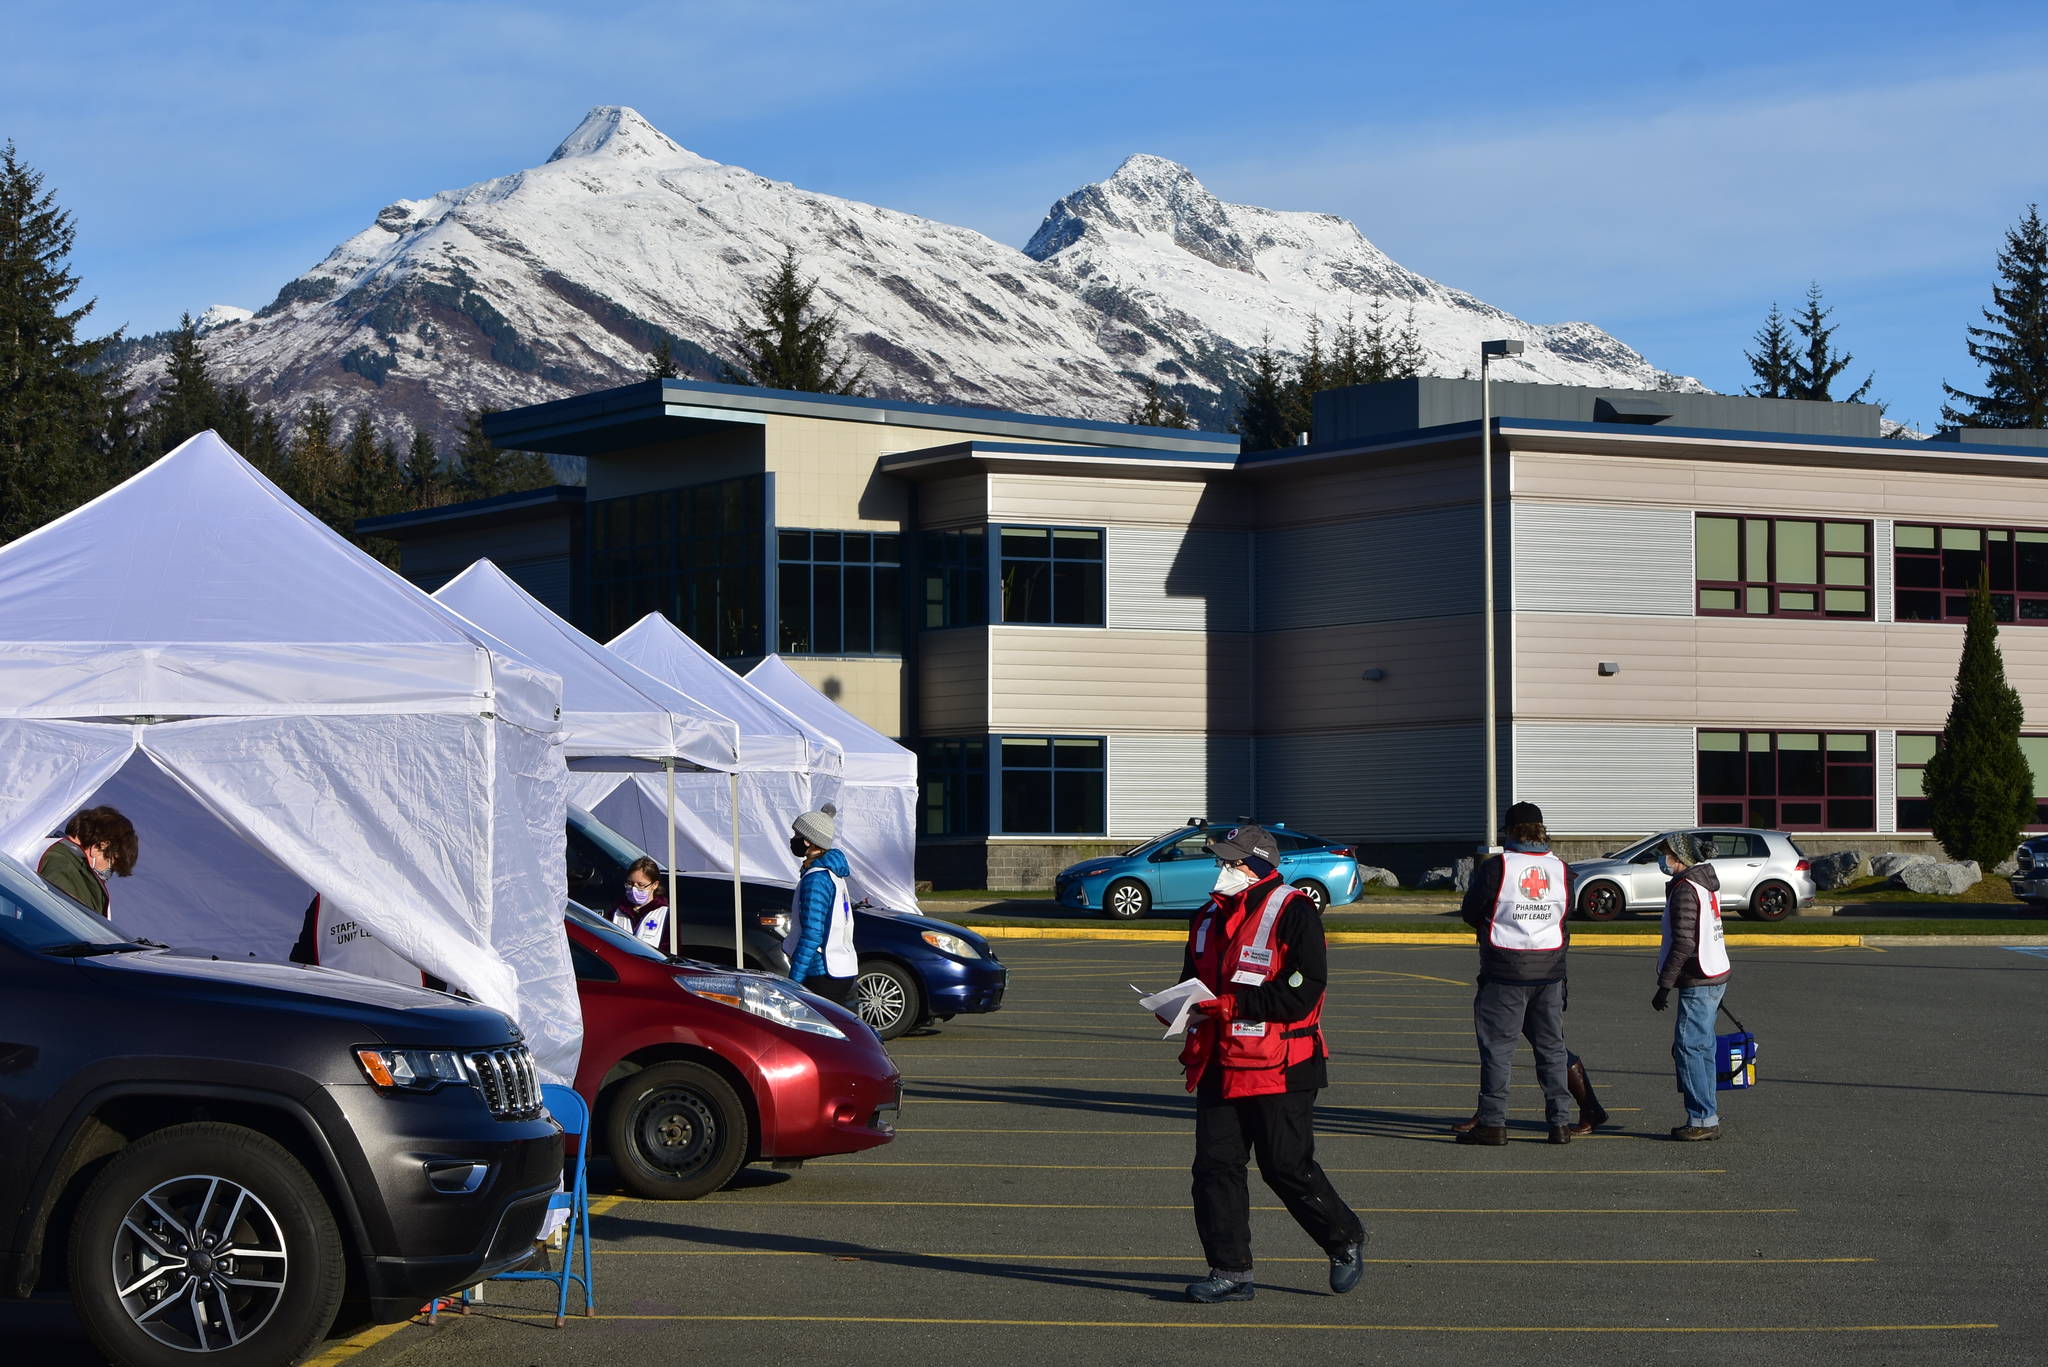 Several tents were set up for health workers and volunteers to guide hundreds of cars through drive-thru flu shot clinics at Thunder Mountain High School on Saturday, Oct. 24, 2020. A collaboration between state and local authorities, health officials set up the clinic to mass vaccinate Juneauites as an additional deterrent against the spread of the coronavirus. (Peter Segall / Juneau Empire)